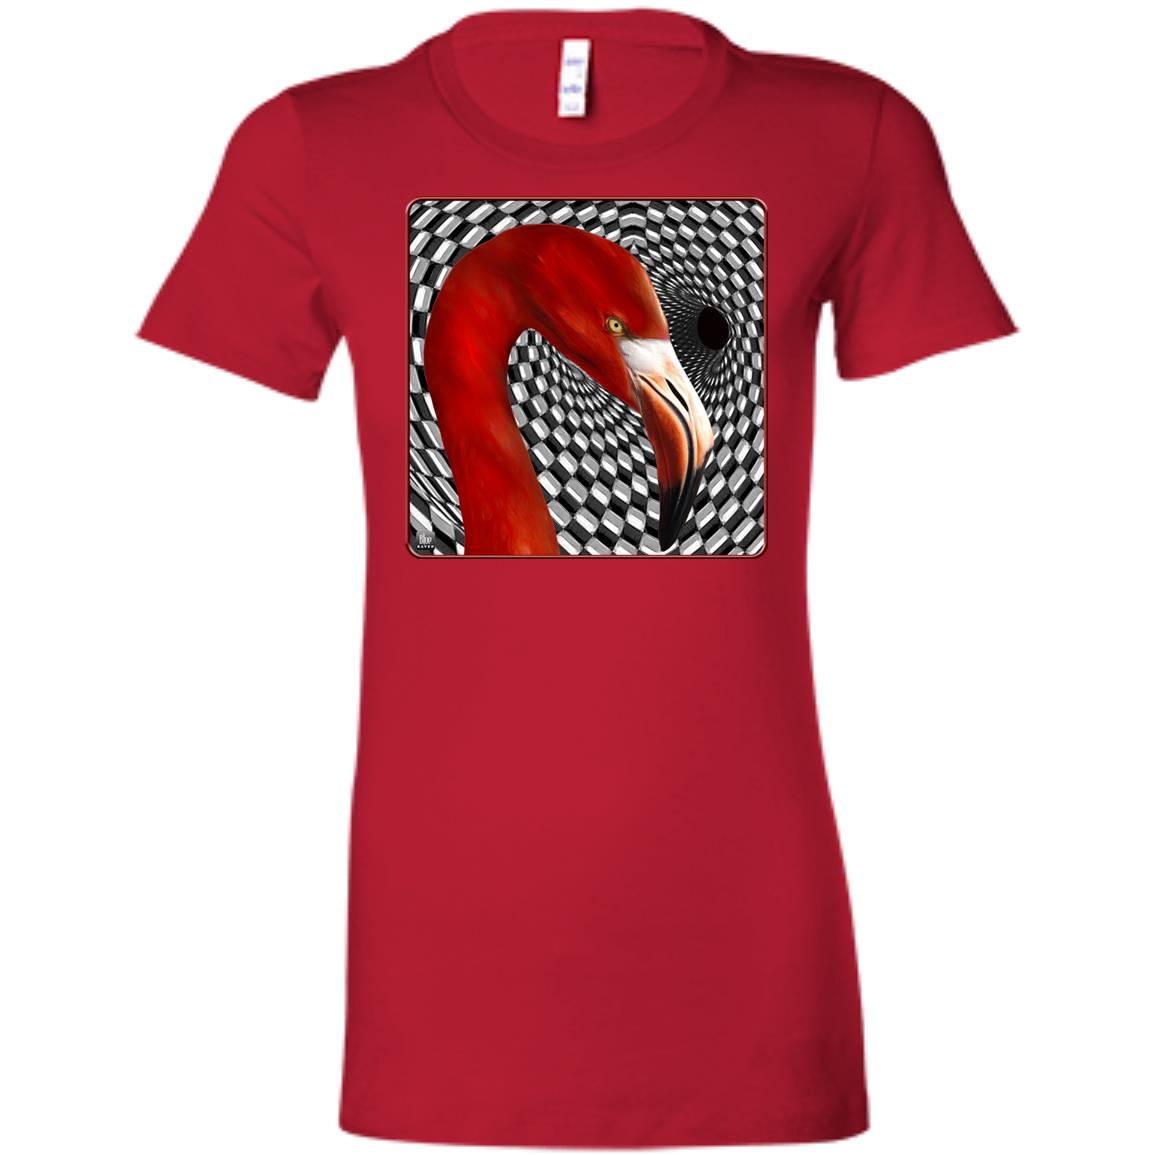 the flamingo - Women's Fitted T-Shirt